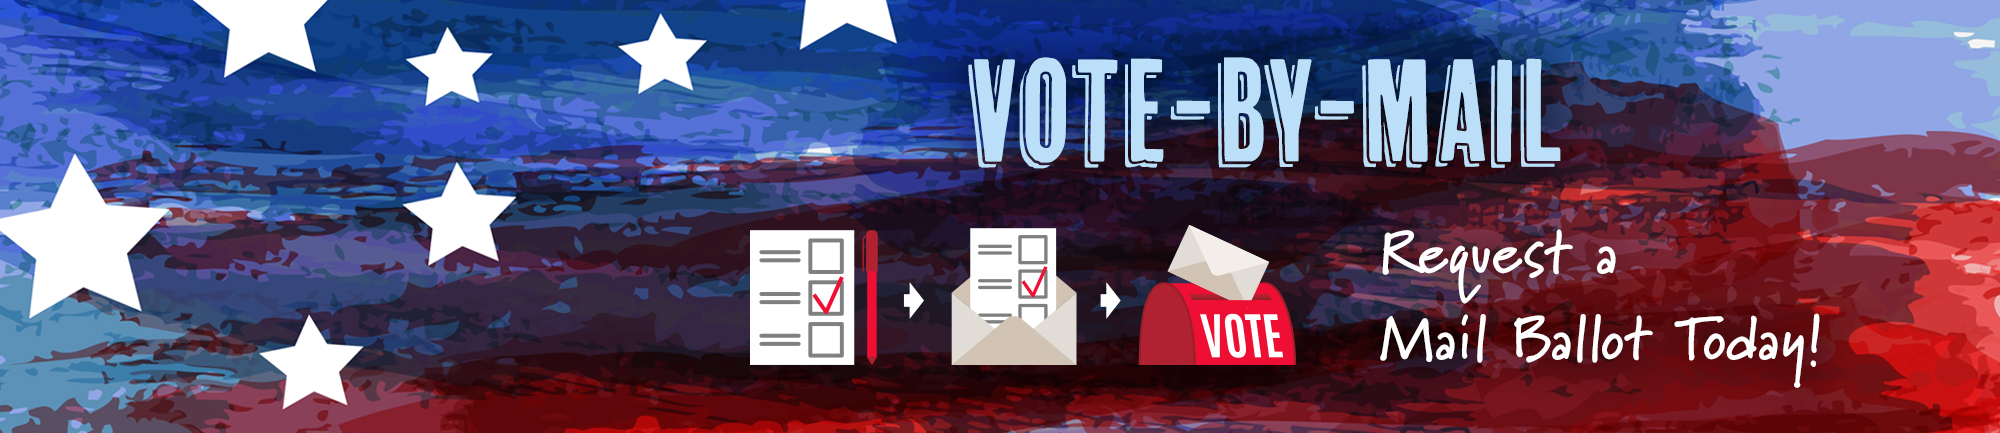 Vote-by-Mail, Request a ballot today!